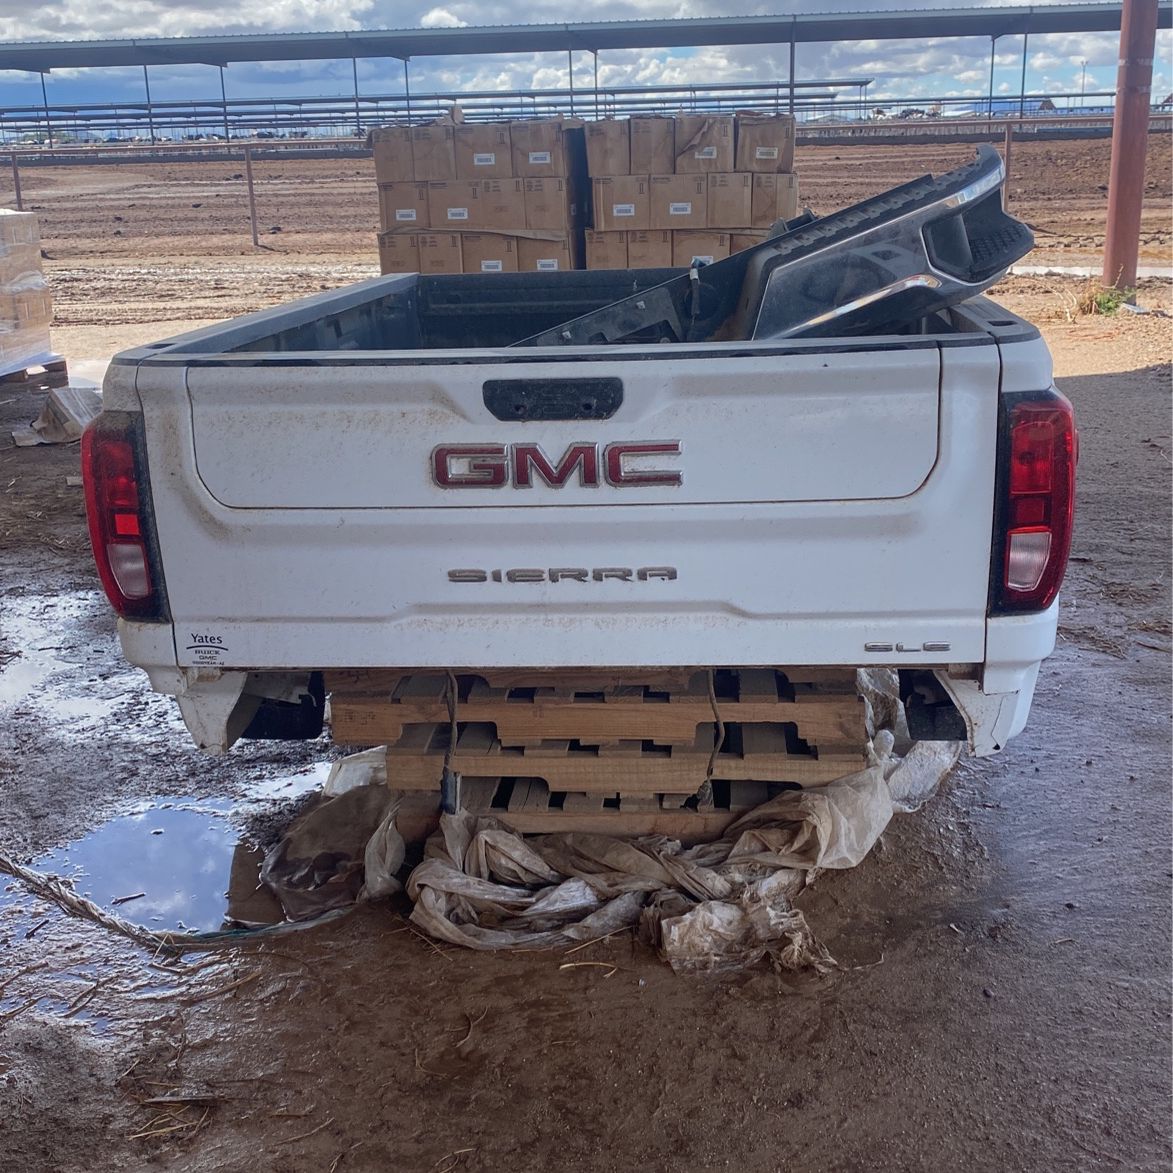 2022 Gmc Sierra 2500 Bed With Rear Bumper And Fancy Tailgate